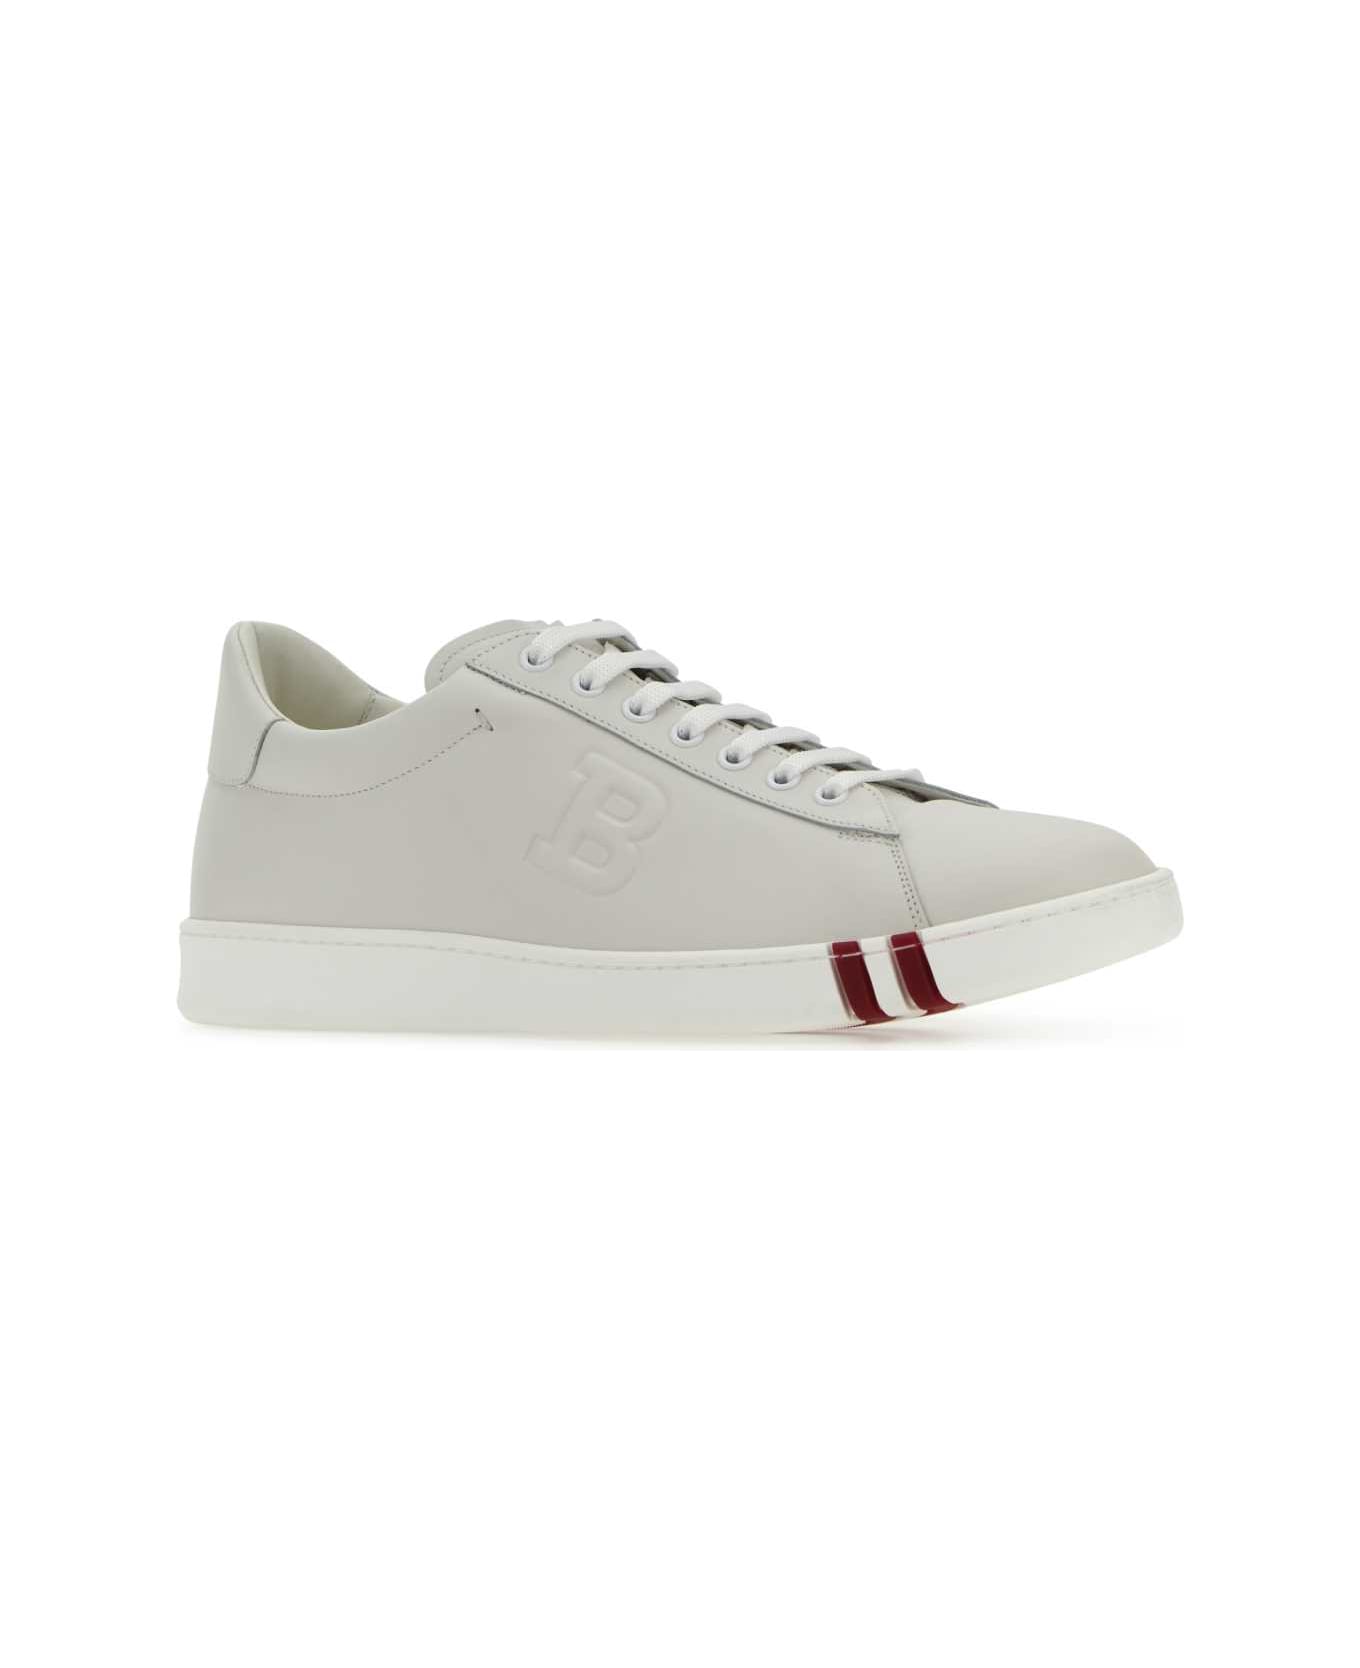 Bally Chalk Leather Asher Sneakers - F607